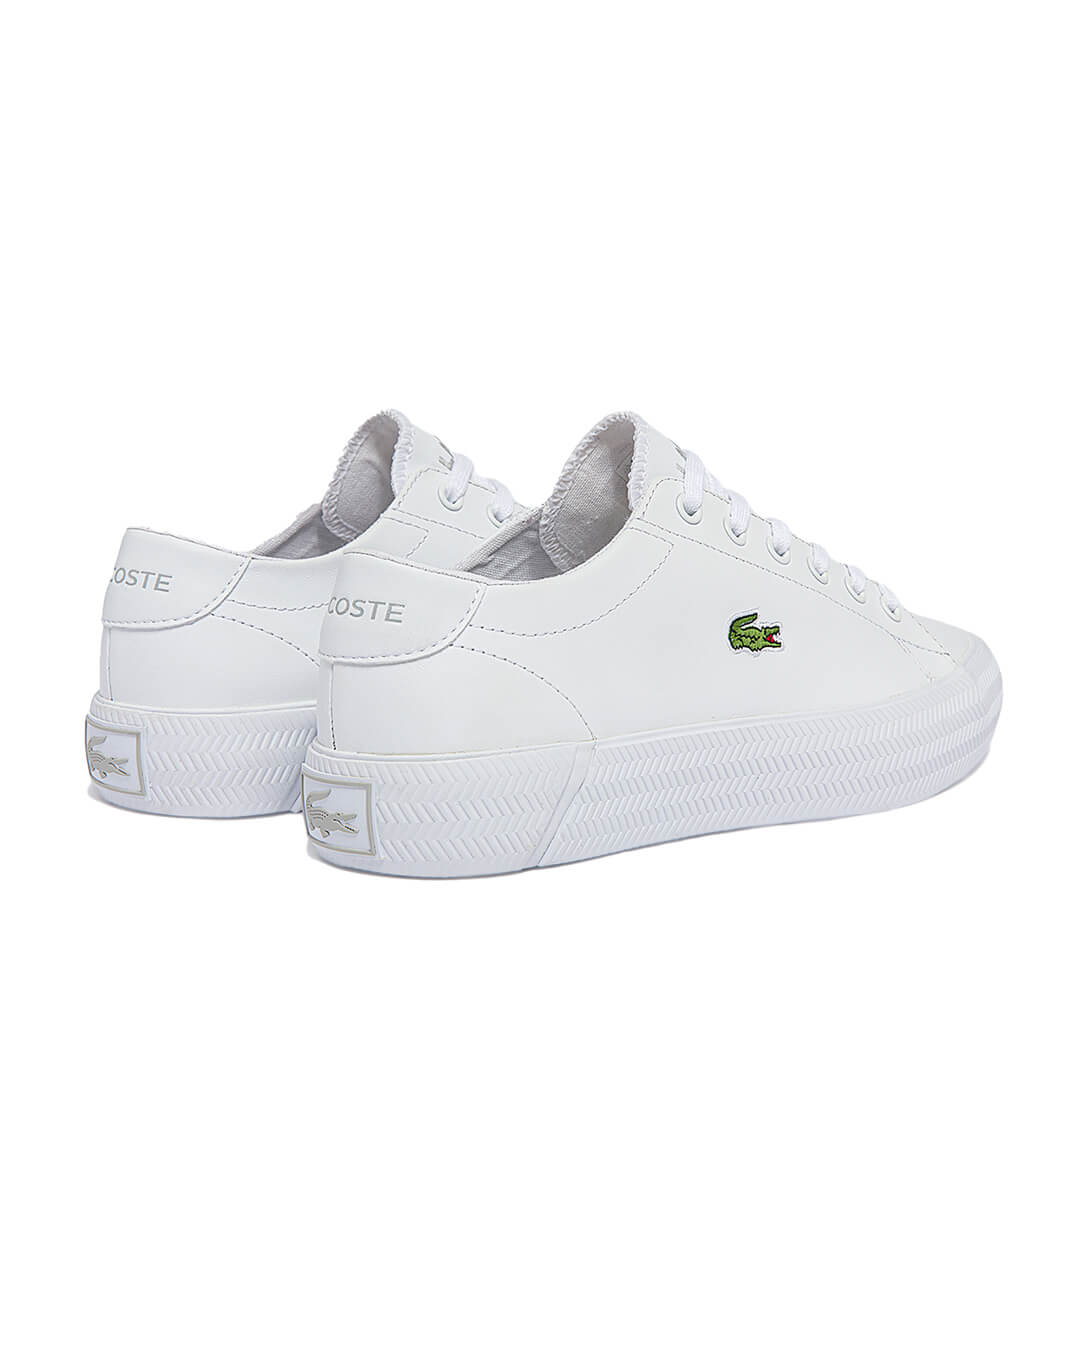 Lacoste Shoes Lacoste Gripshot Leather White Sneakers